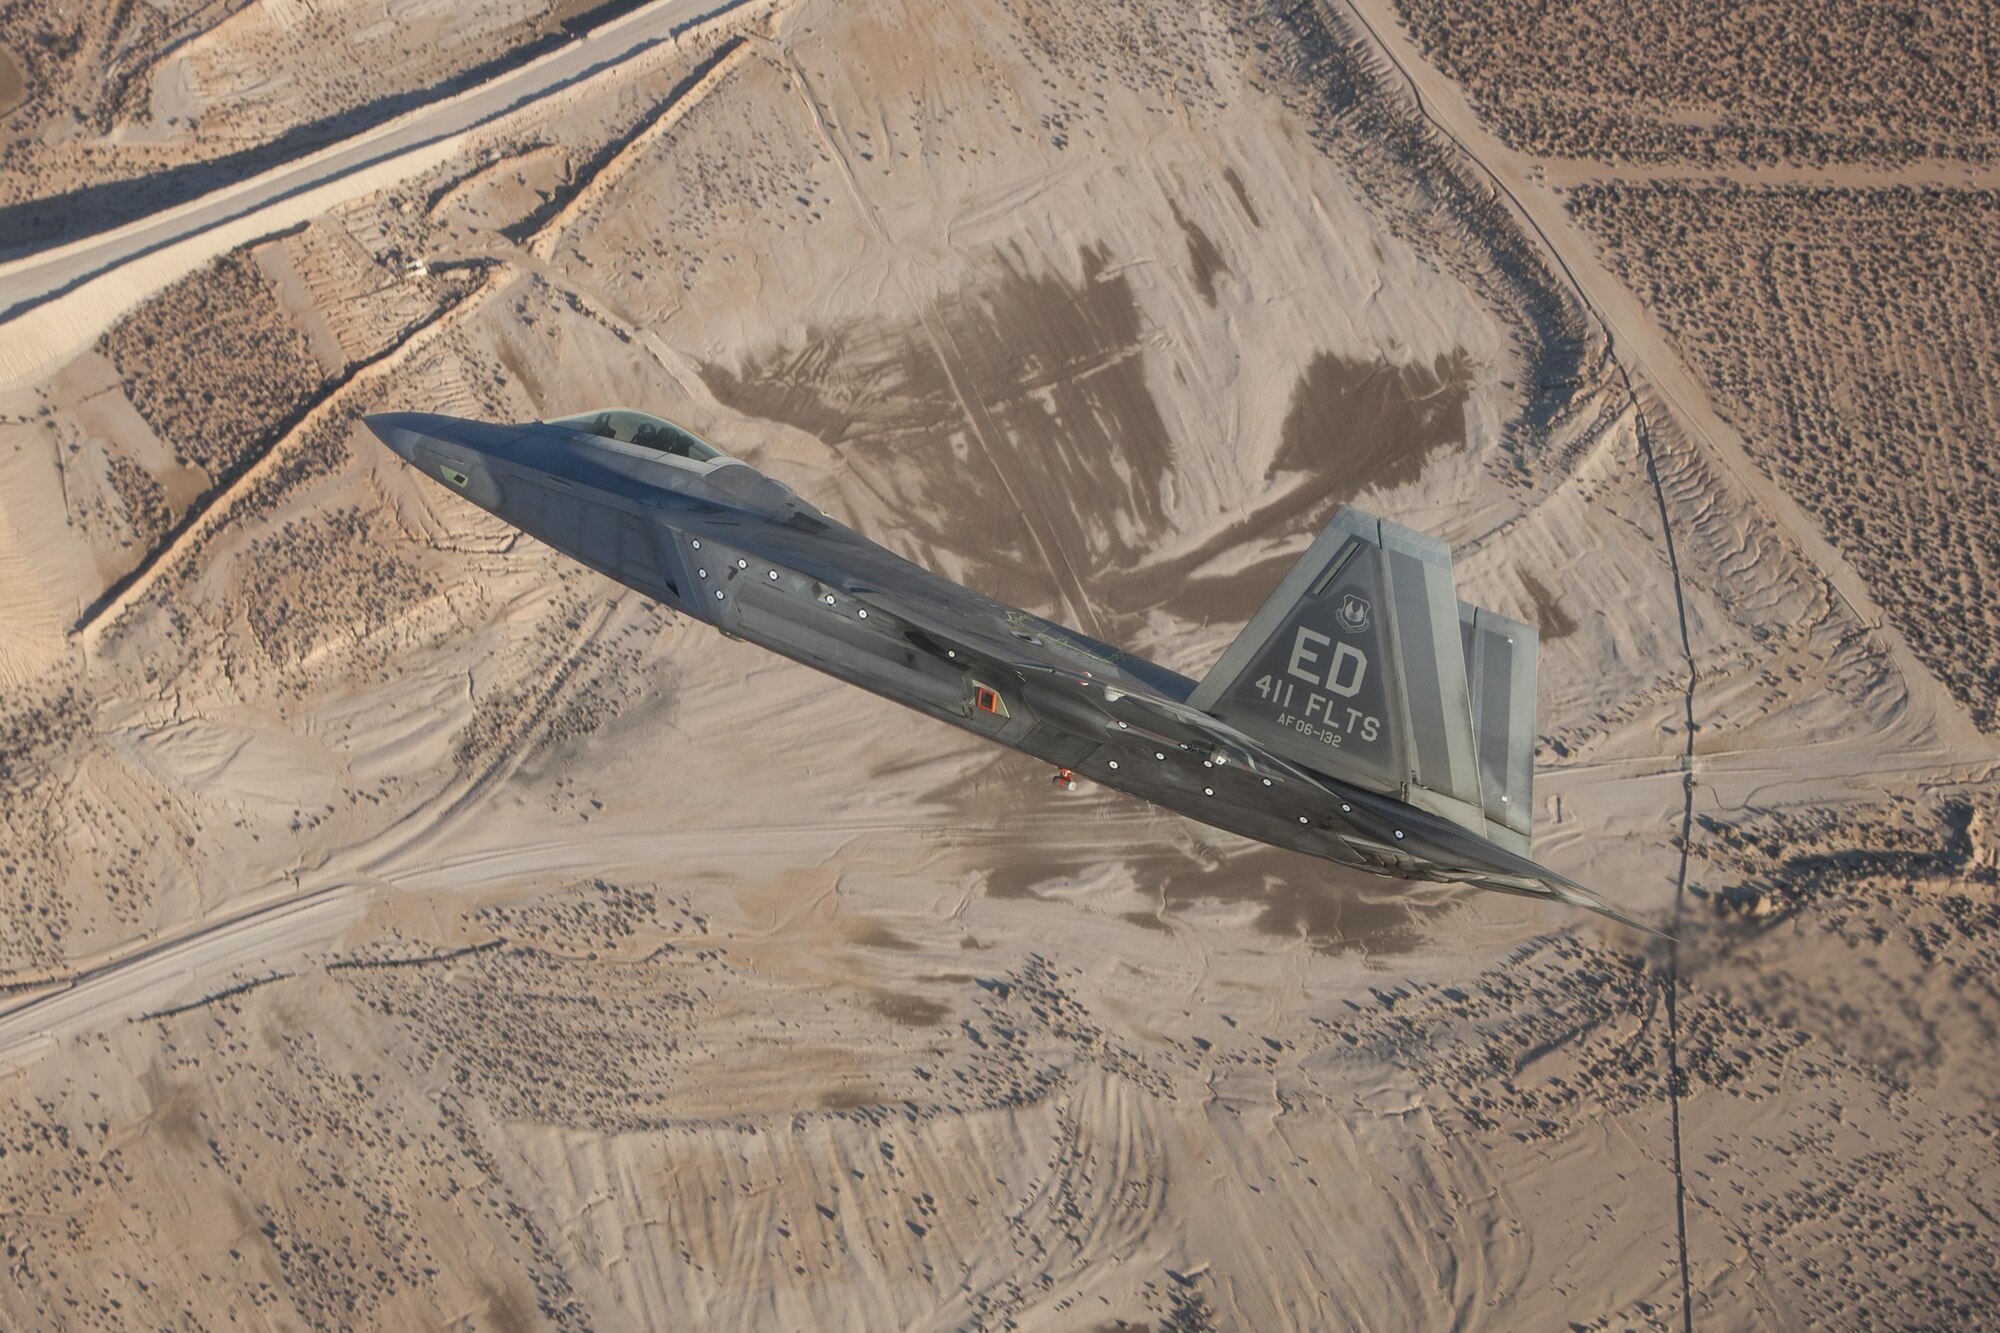 An F-22 Raptor assigned to the 411th Flight Test Squadron maneuvers over the Mojave Desert during a test mission. (Photo by Chad Bellay/Lockheed Martin)